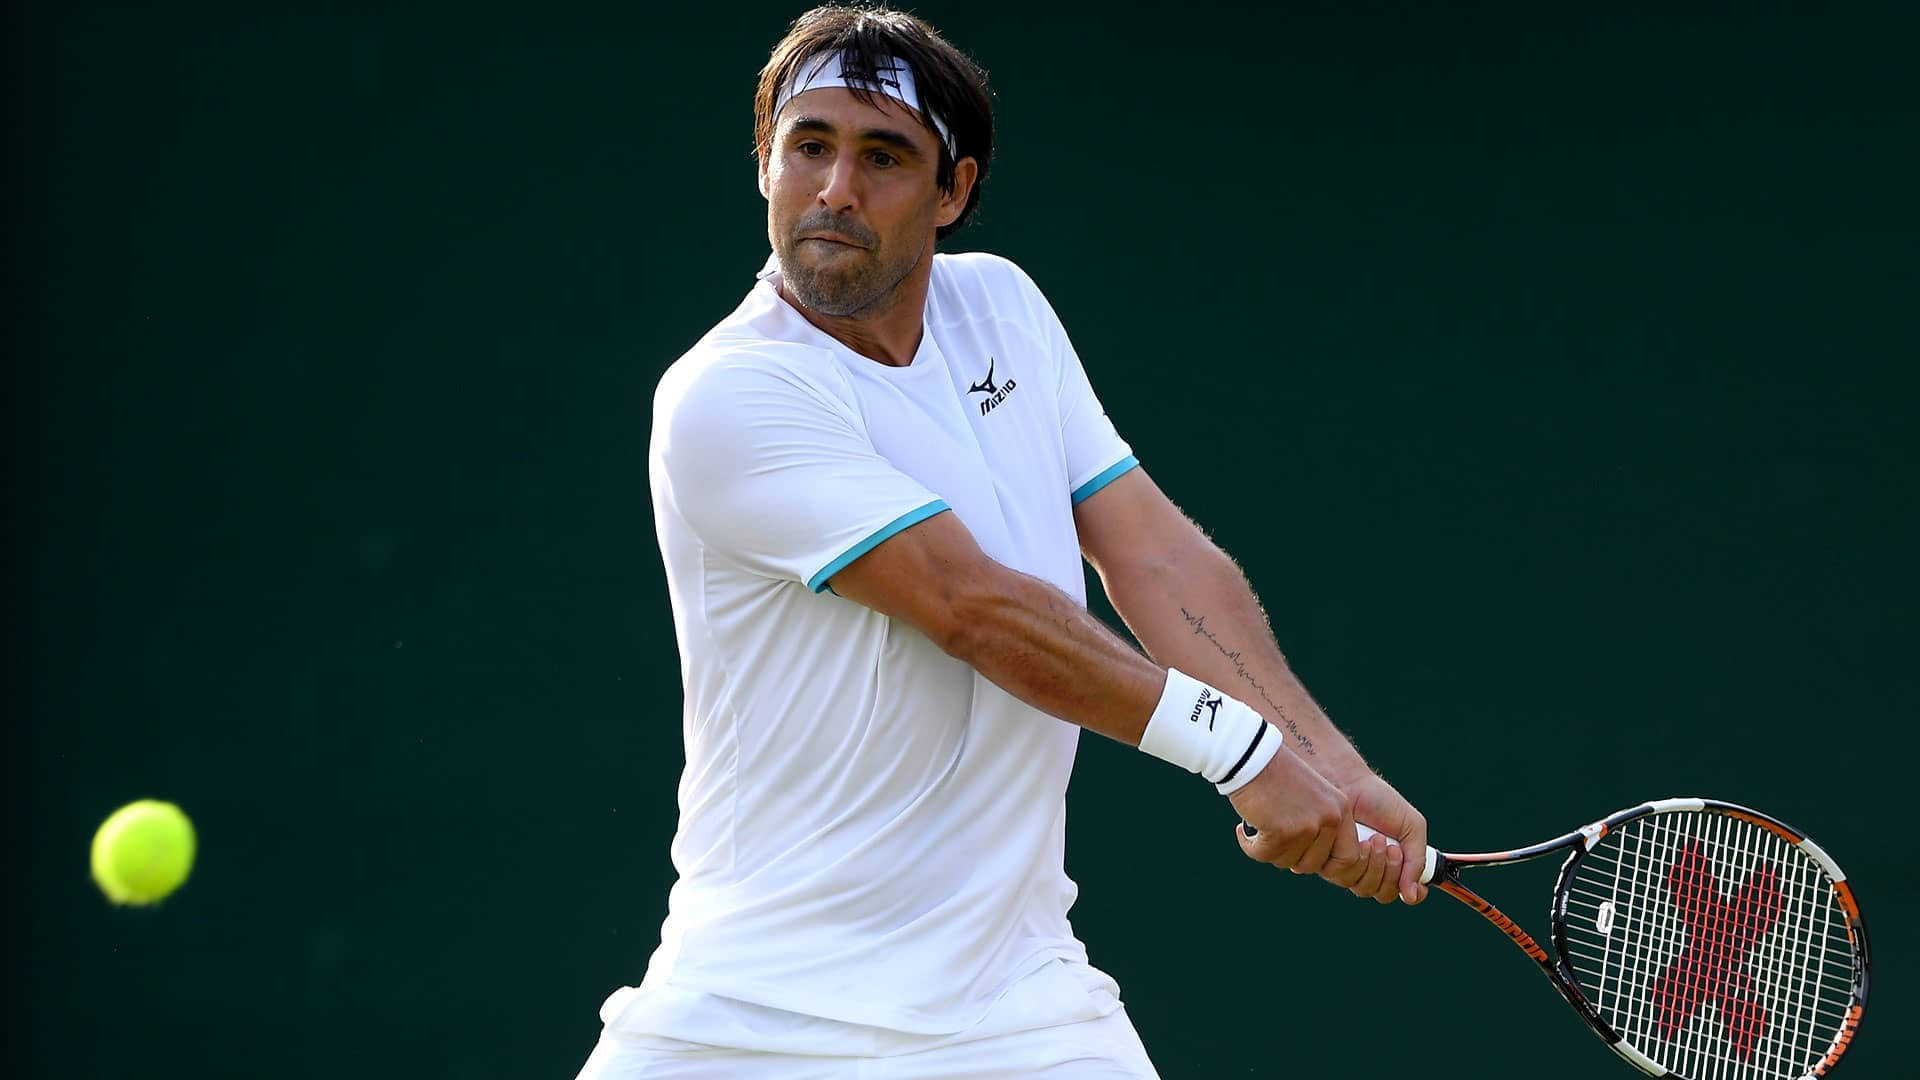 Marcos Baghdatis expertly preparing to counter an incoming ball during a tennis match. Wallpaper